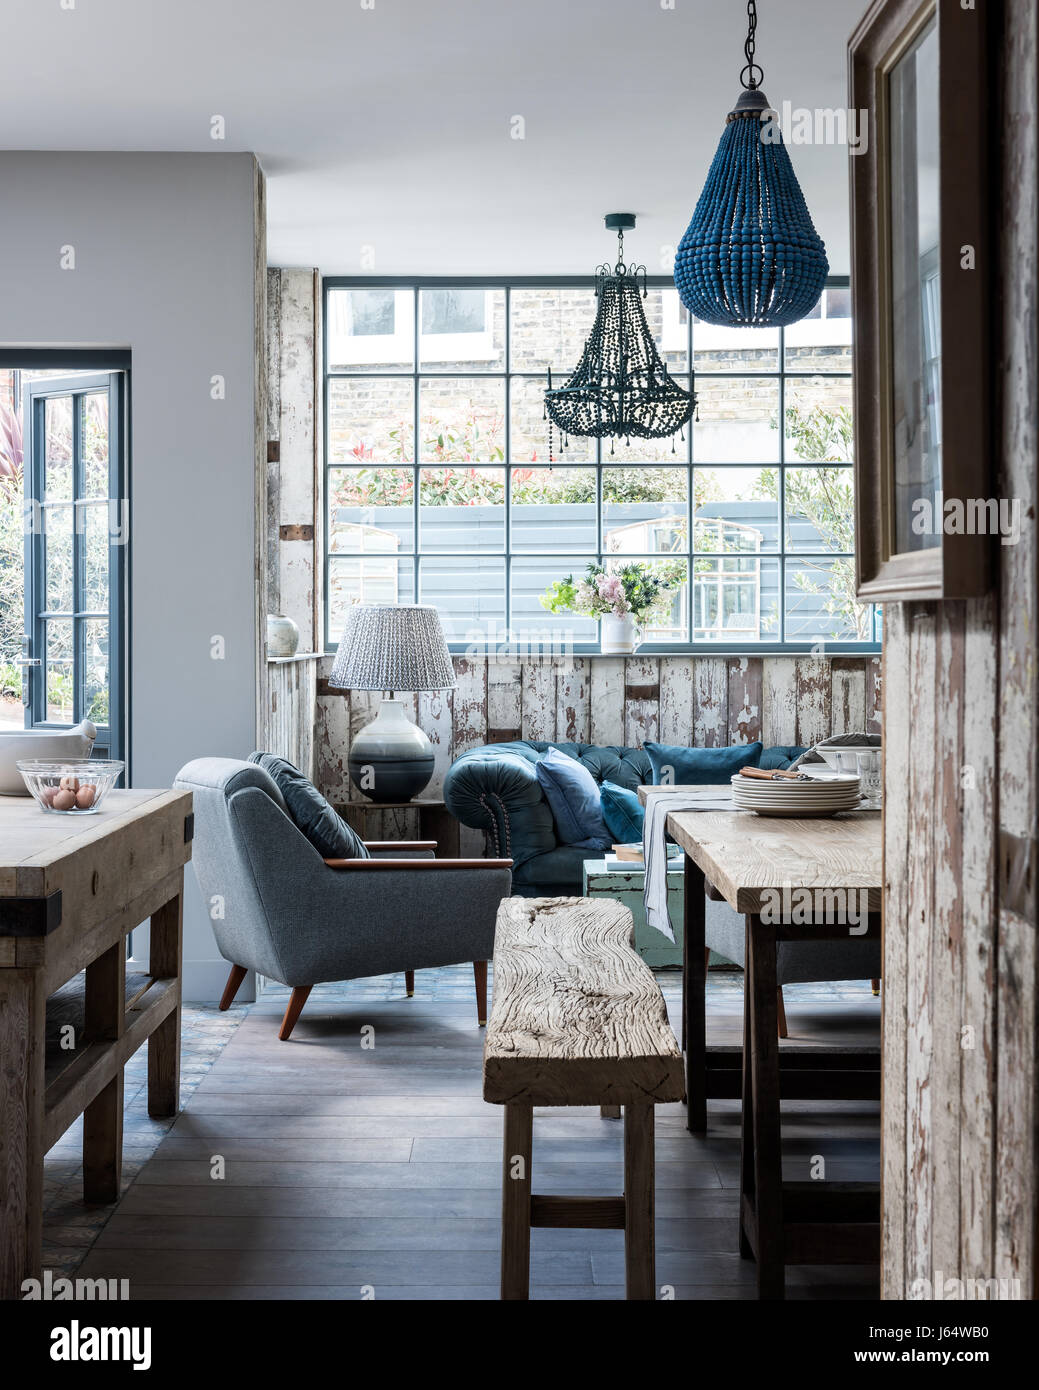 Open plan kitchen diner with mismatching beaded chandeliers, rustic bench and mid century armchair. The floors are white-washed oak Stock Photo